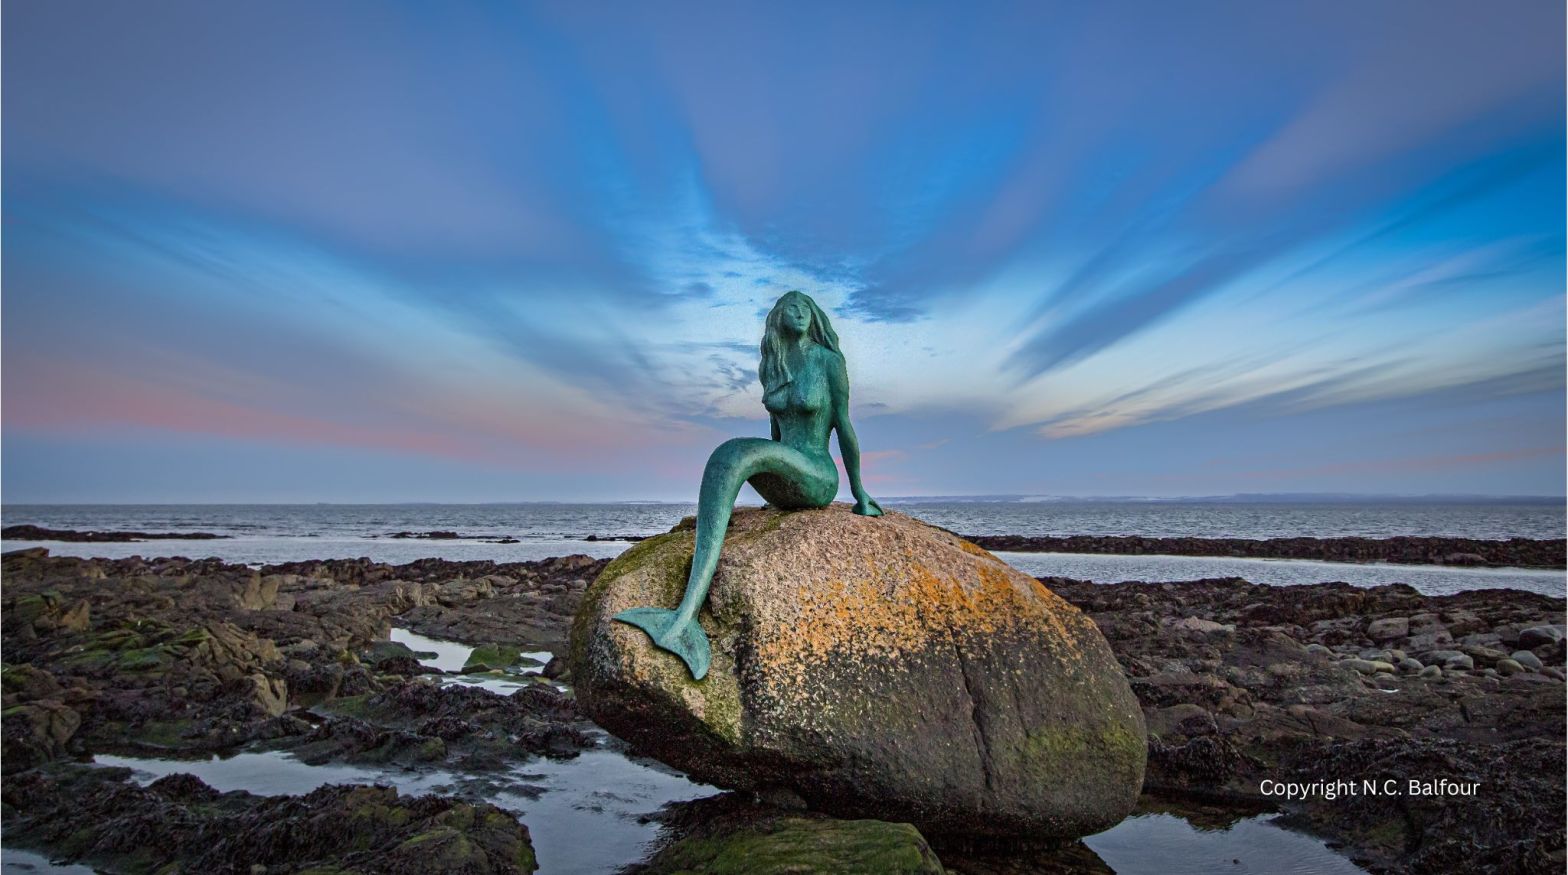 The Mermaid of the North, Balintore. Photograph by Norma Balfour.